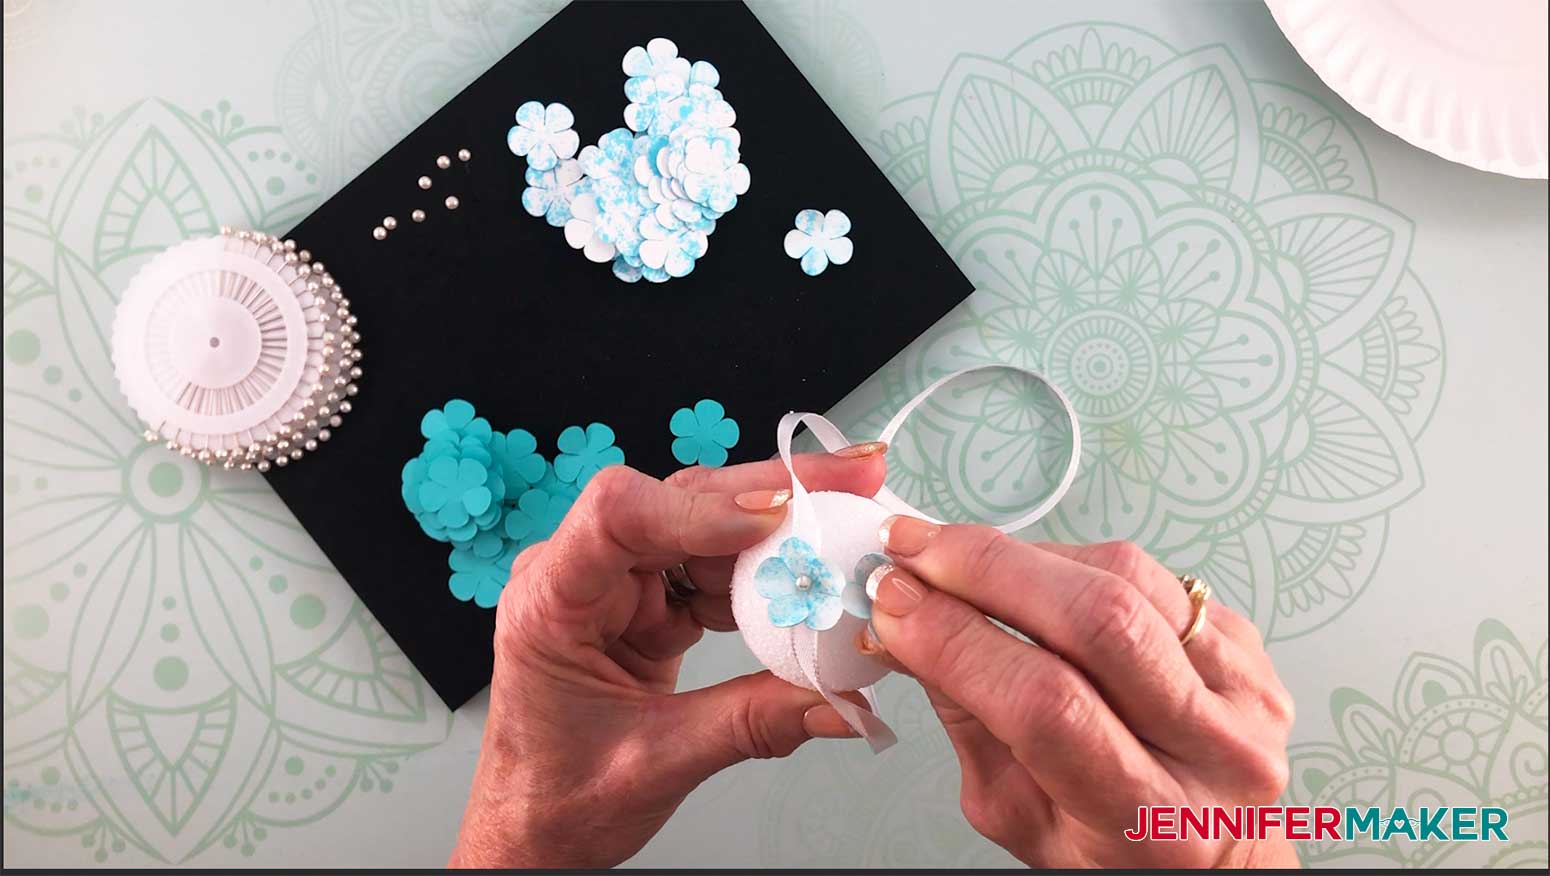 Make a paper hydrangea flower by sticking the petals into the styrofoam ball